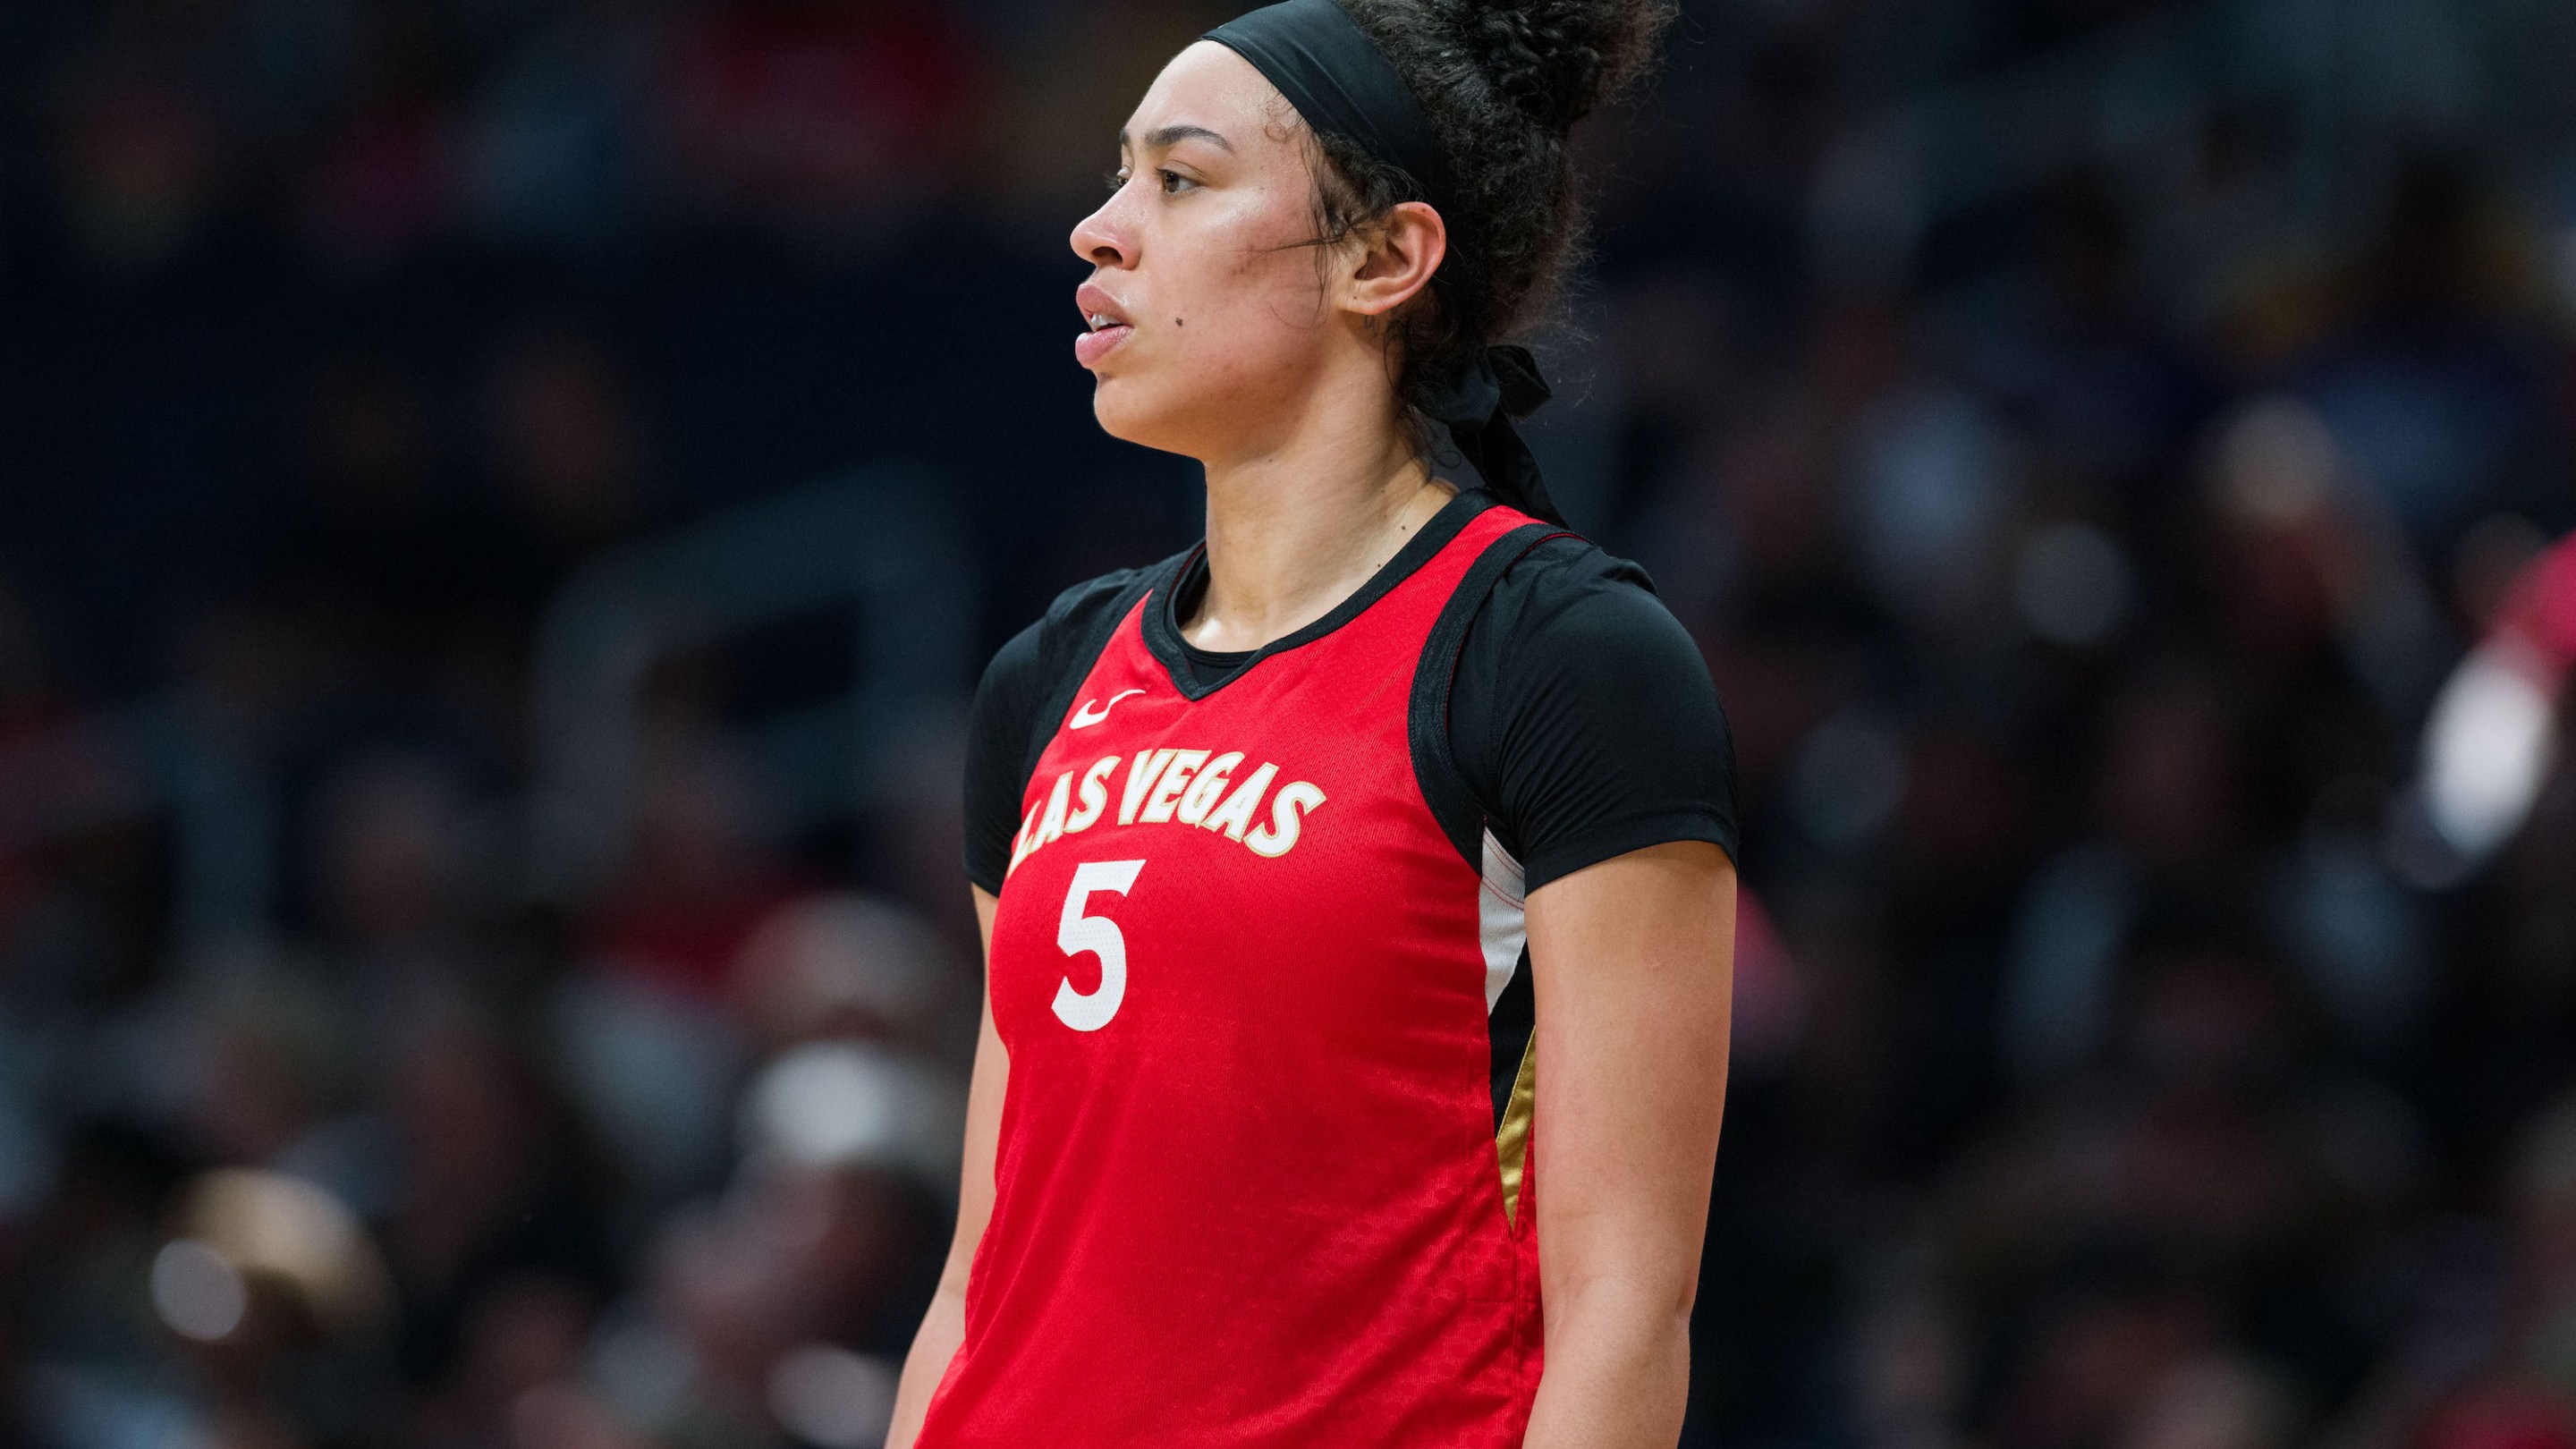 INDIANAPOLIS, IN - JULY 31: Las Vegas Aces forward Dearica Hamby (5) looks to the sidelines during the Indiana Fever vs Las Vegas Aces WNBA game on July 31, 2022 at Hinkle Fieldhouse in Indianapolis, IN.